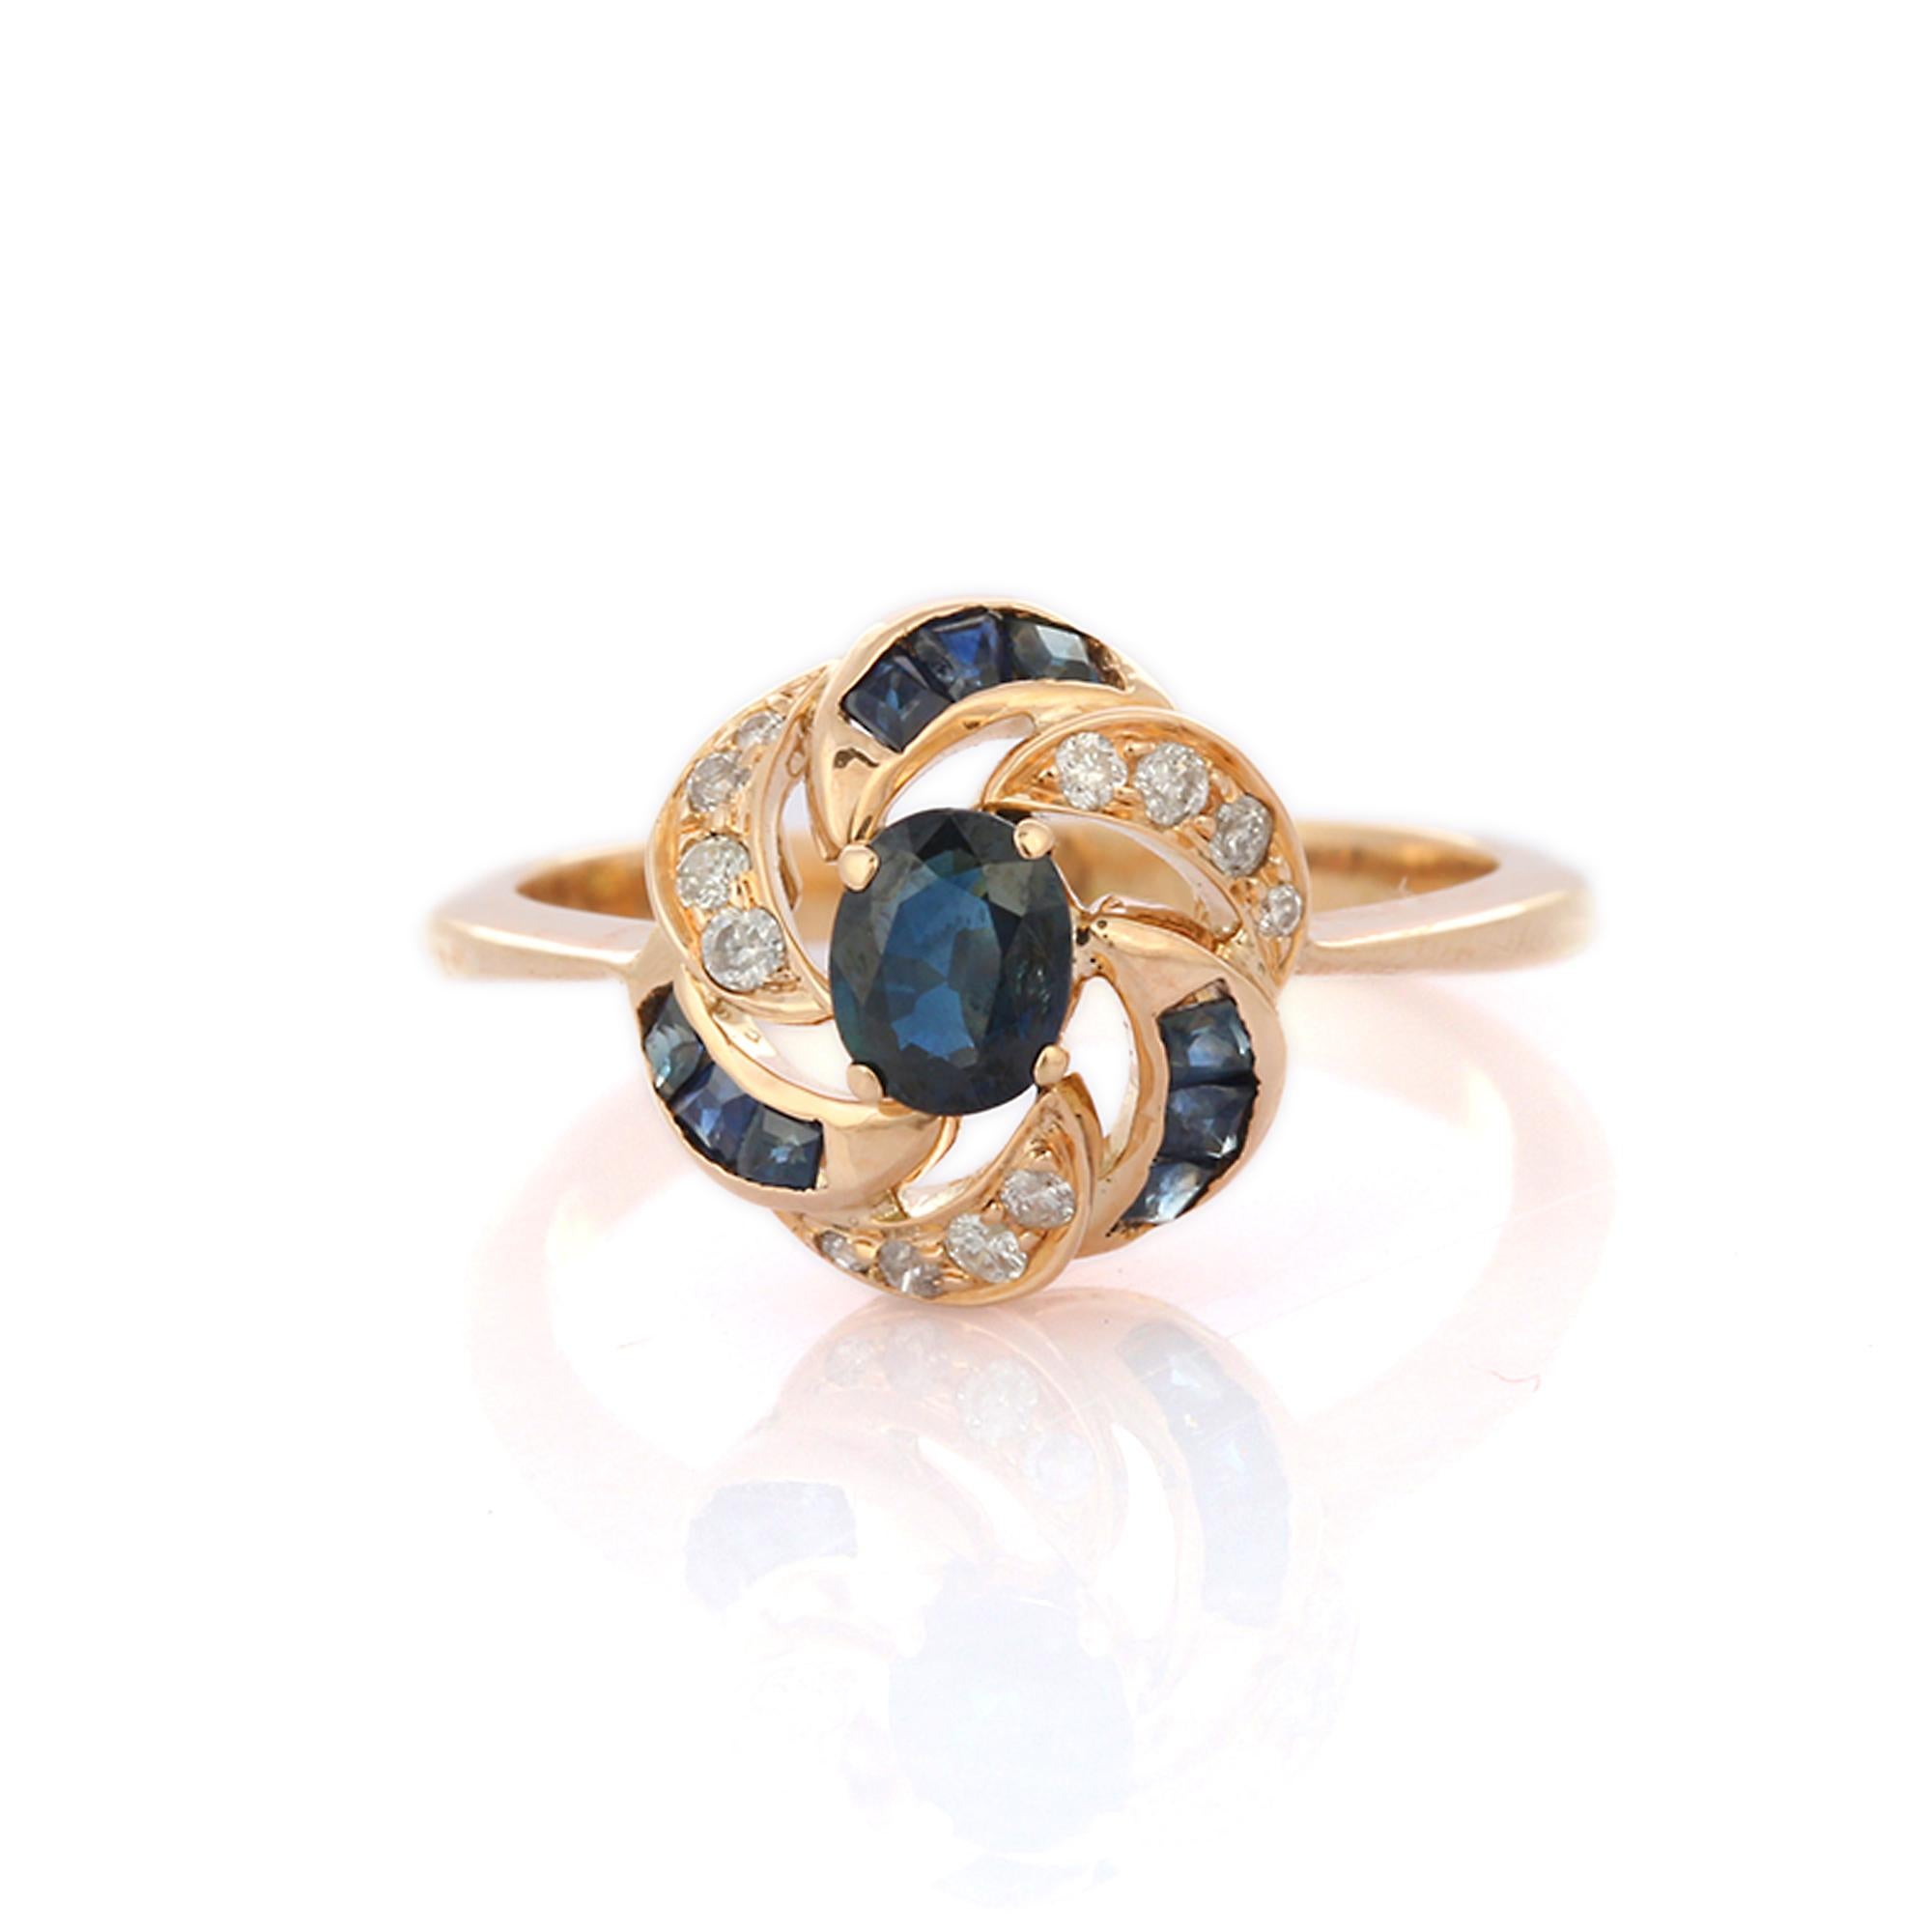 For Sale:  Enticing Sapphire Diamond Floral Bridal Ring in 14K Solid Yellow Gold 5